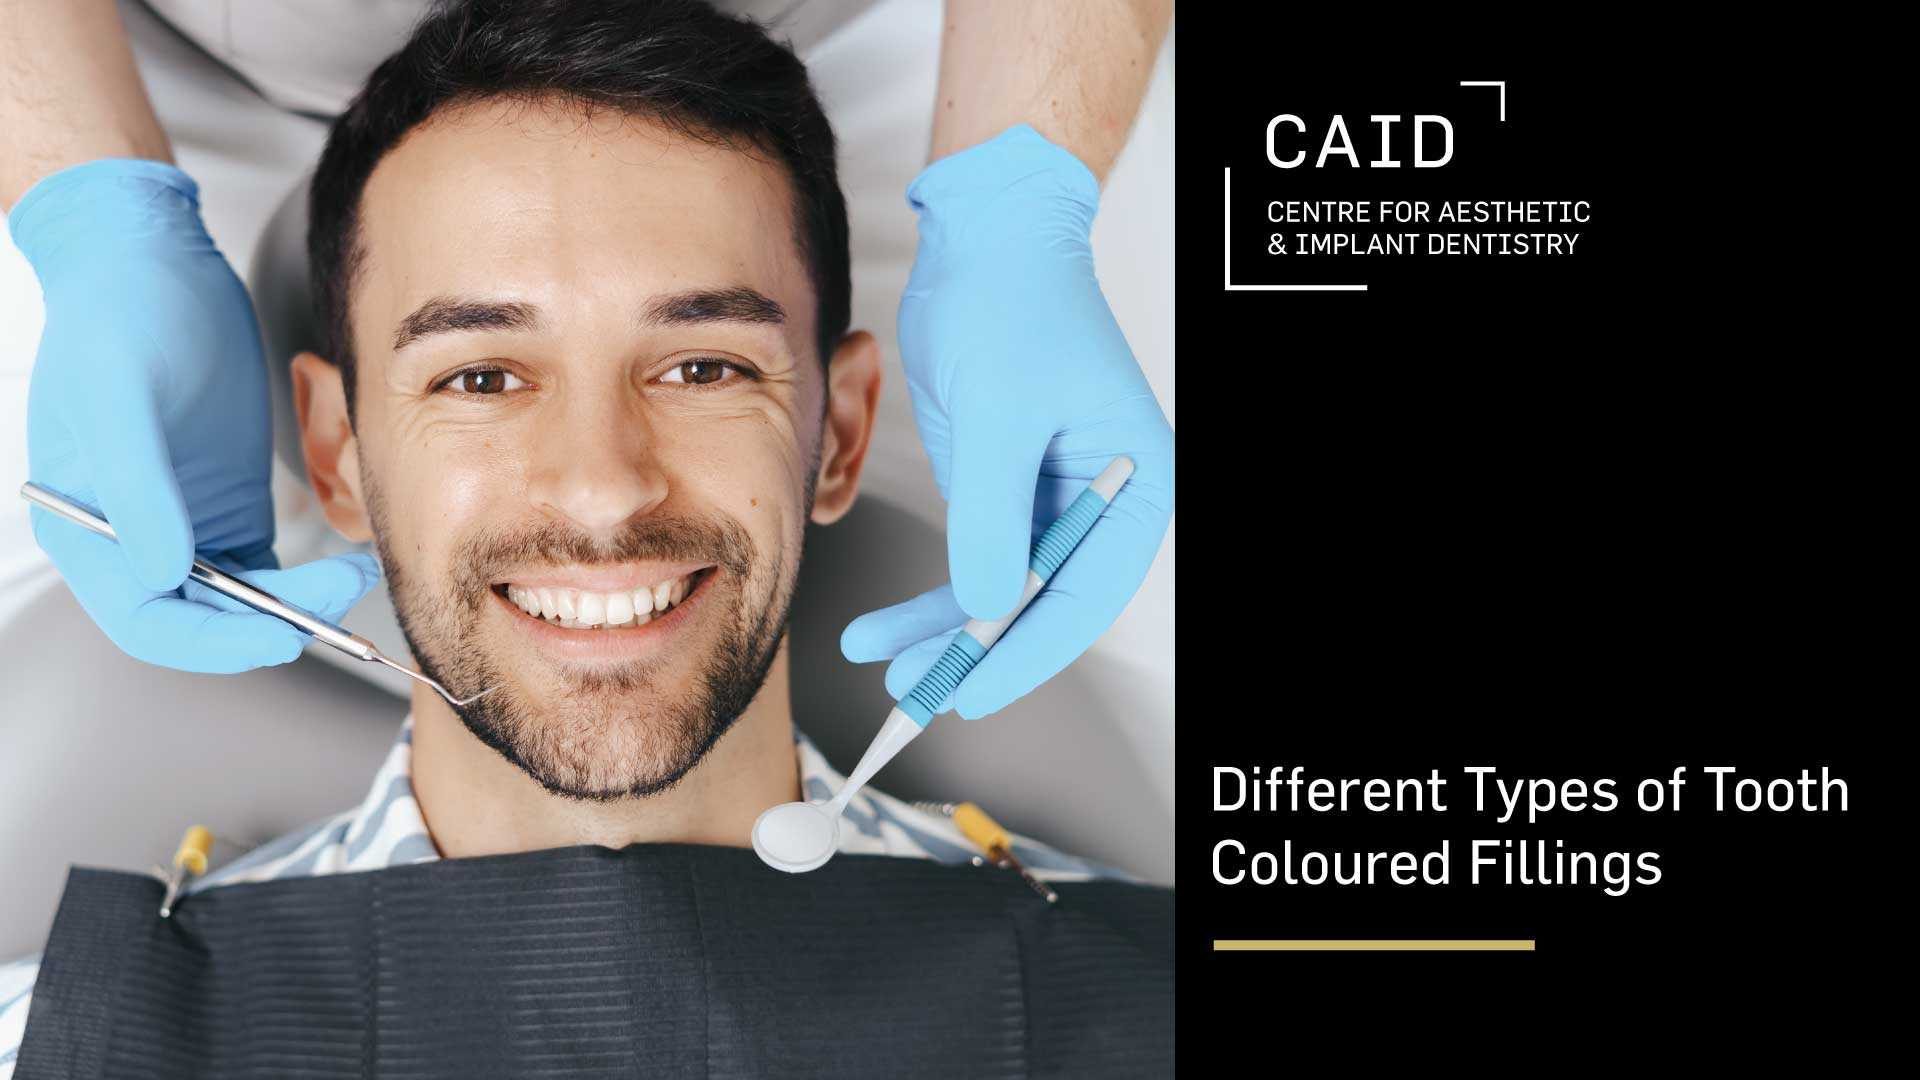 We look at the different types of Tooth-Coloured Fillings